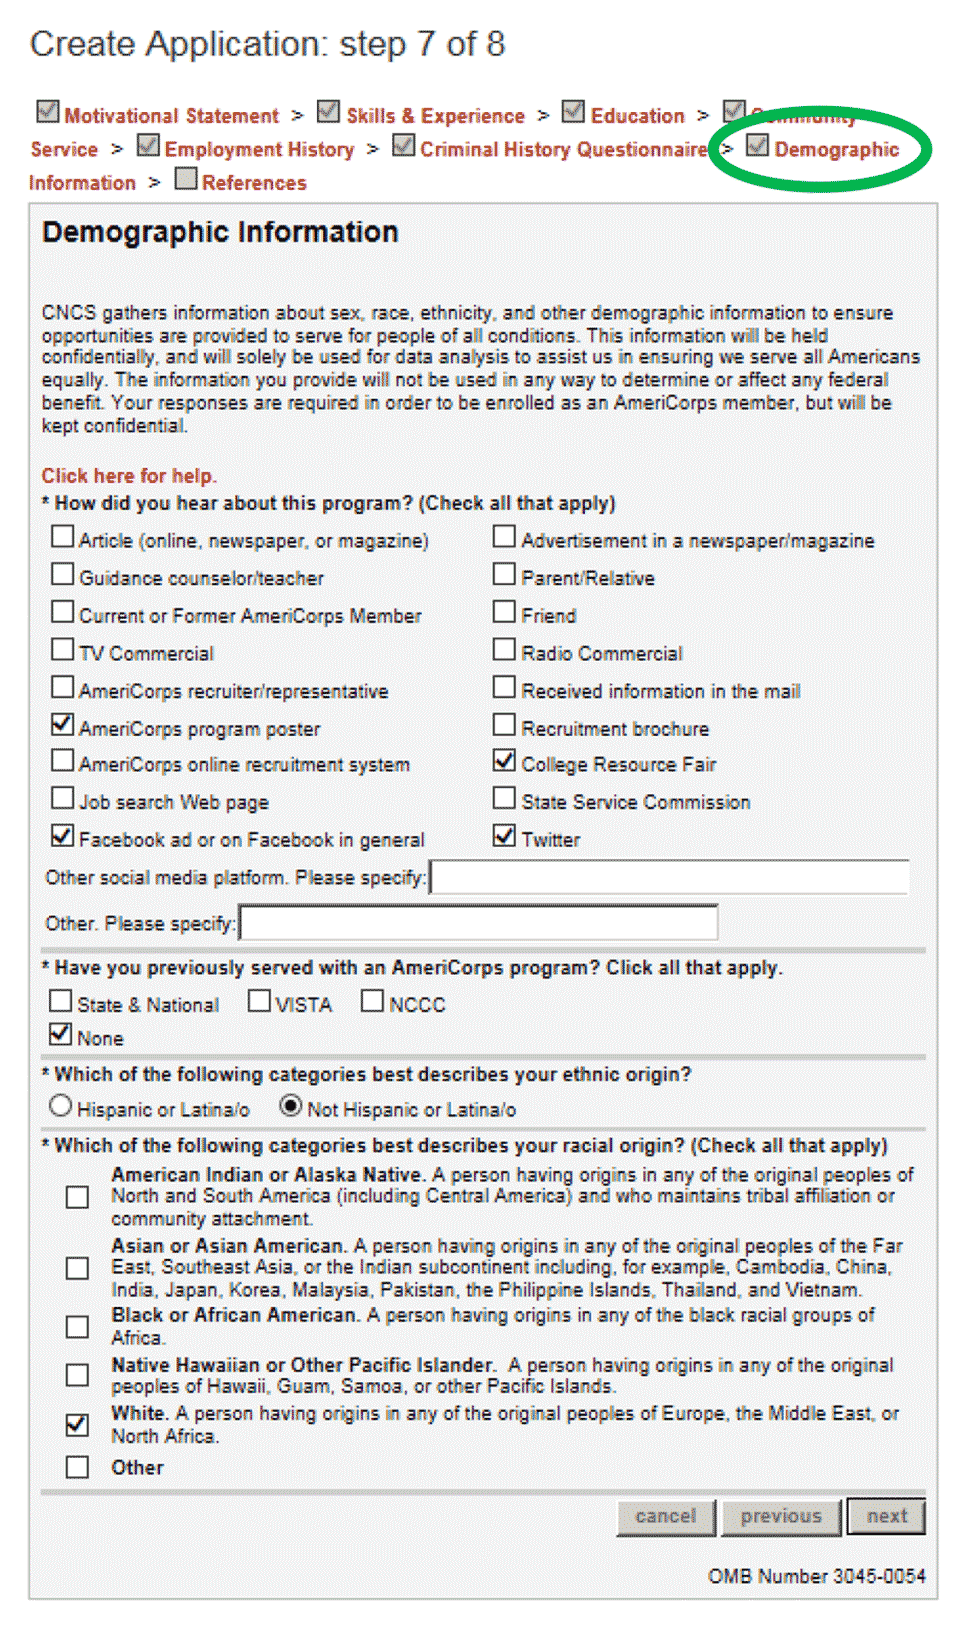 AmeriCorps application step 7: click the Demographic Information Checkbox and then click Next.